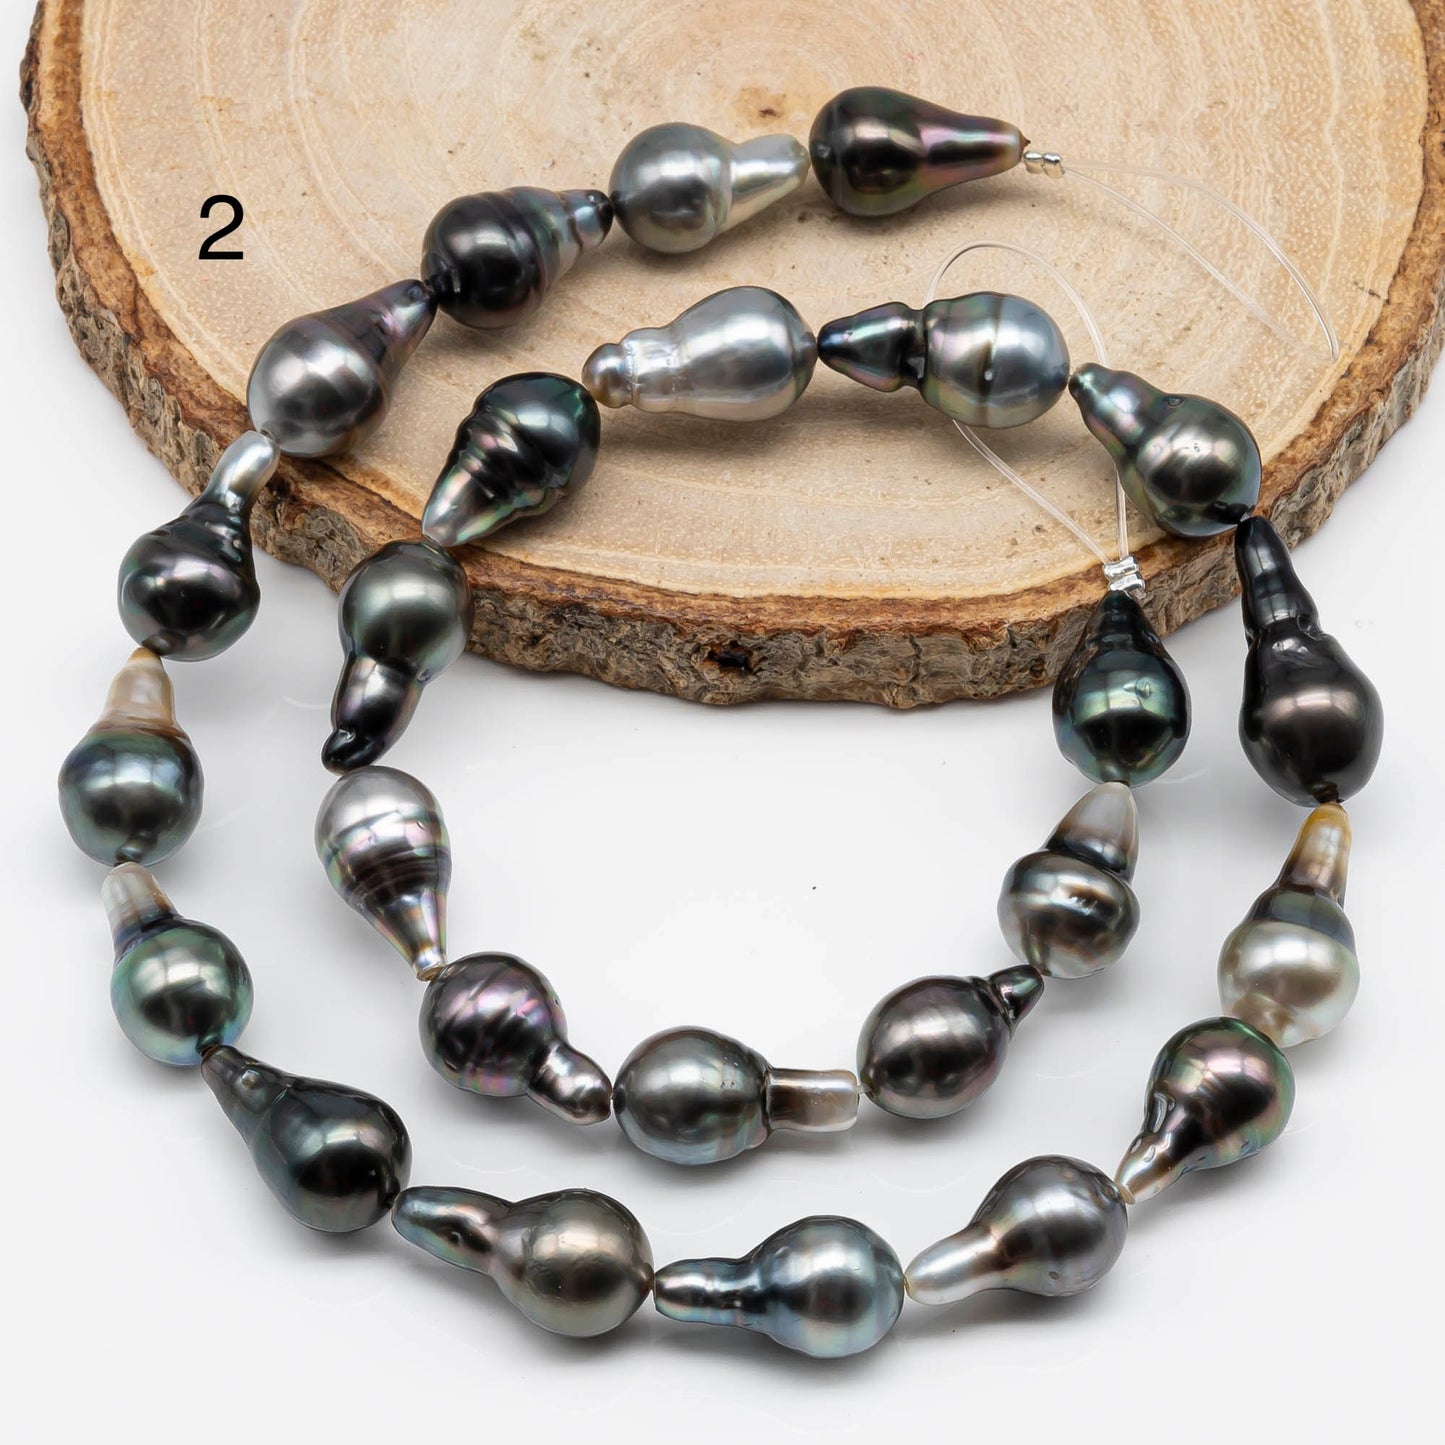 9-10mm Teardrop Tahitian Pearl in High Luster and Natural Color for Jewelry Making in Full Strand, SKU # 1707TH